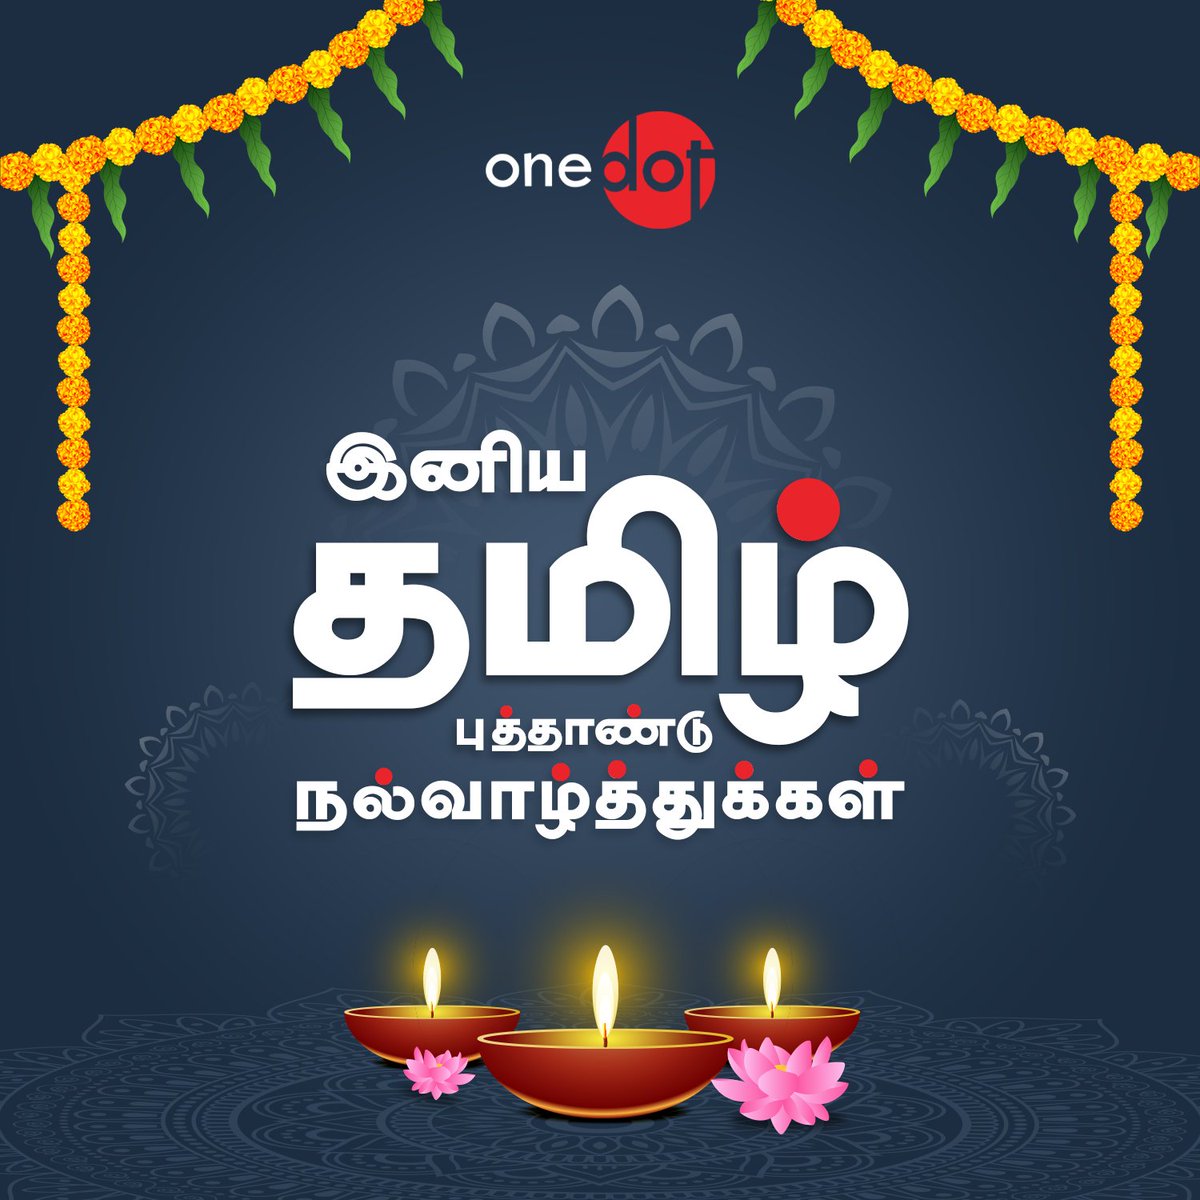 Wishing you a Tamil New Year brimming with success, prosperity, and good fortune. 

Happy Tamil New Year! 💼🌟   

#onedotmedia #TamilNewYear #TamilNewYear2024 #TamilFestival #TamilCulture #NewYearCelebration